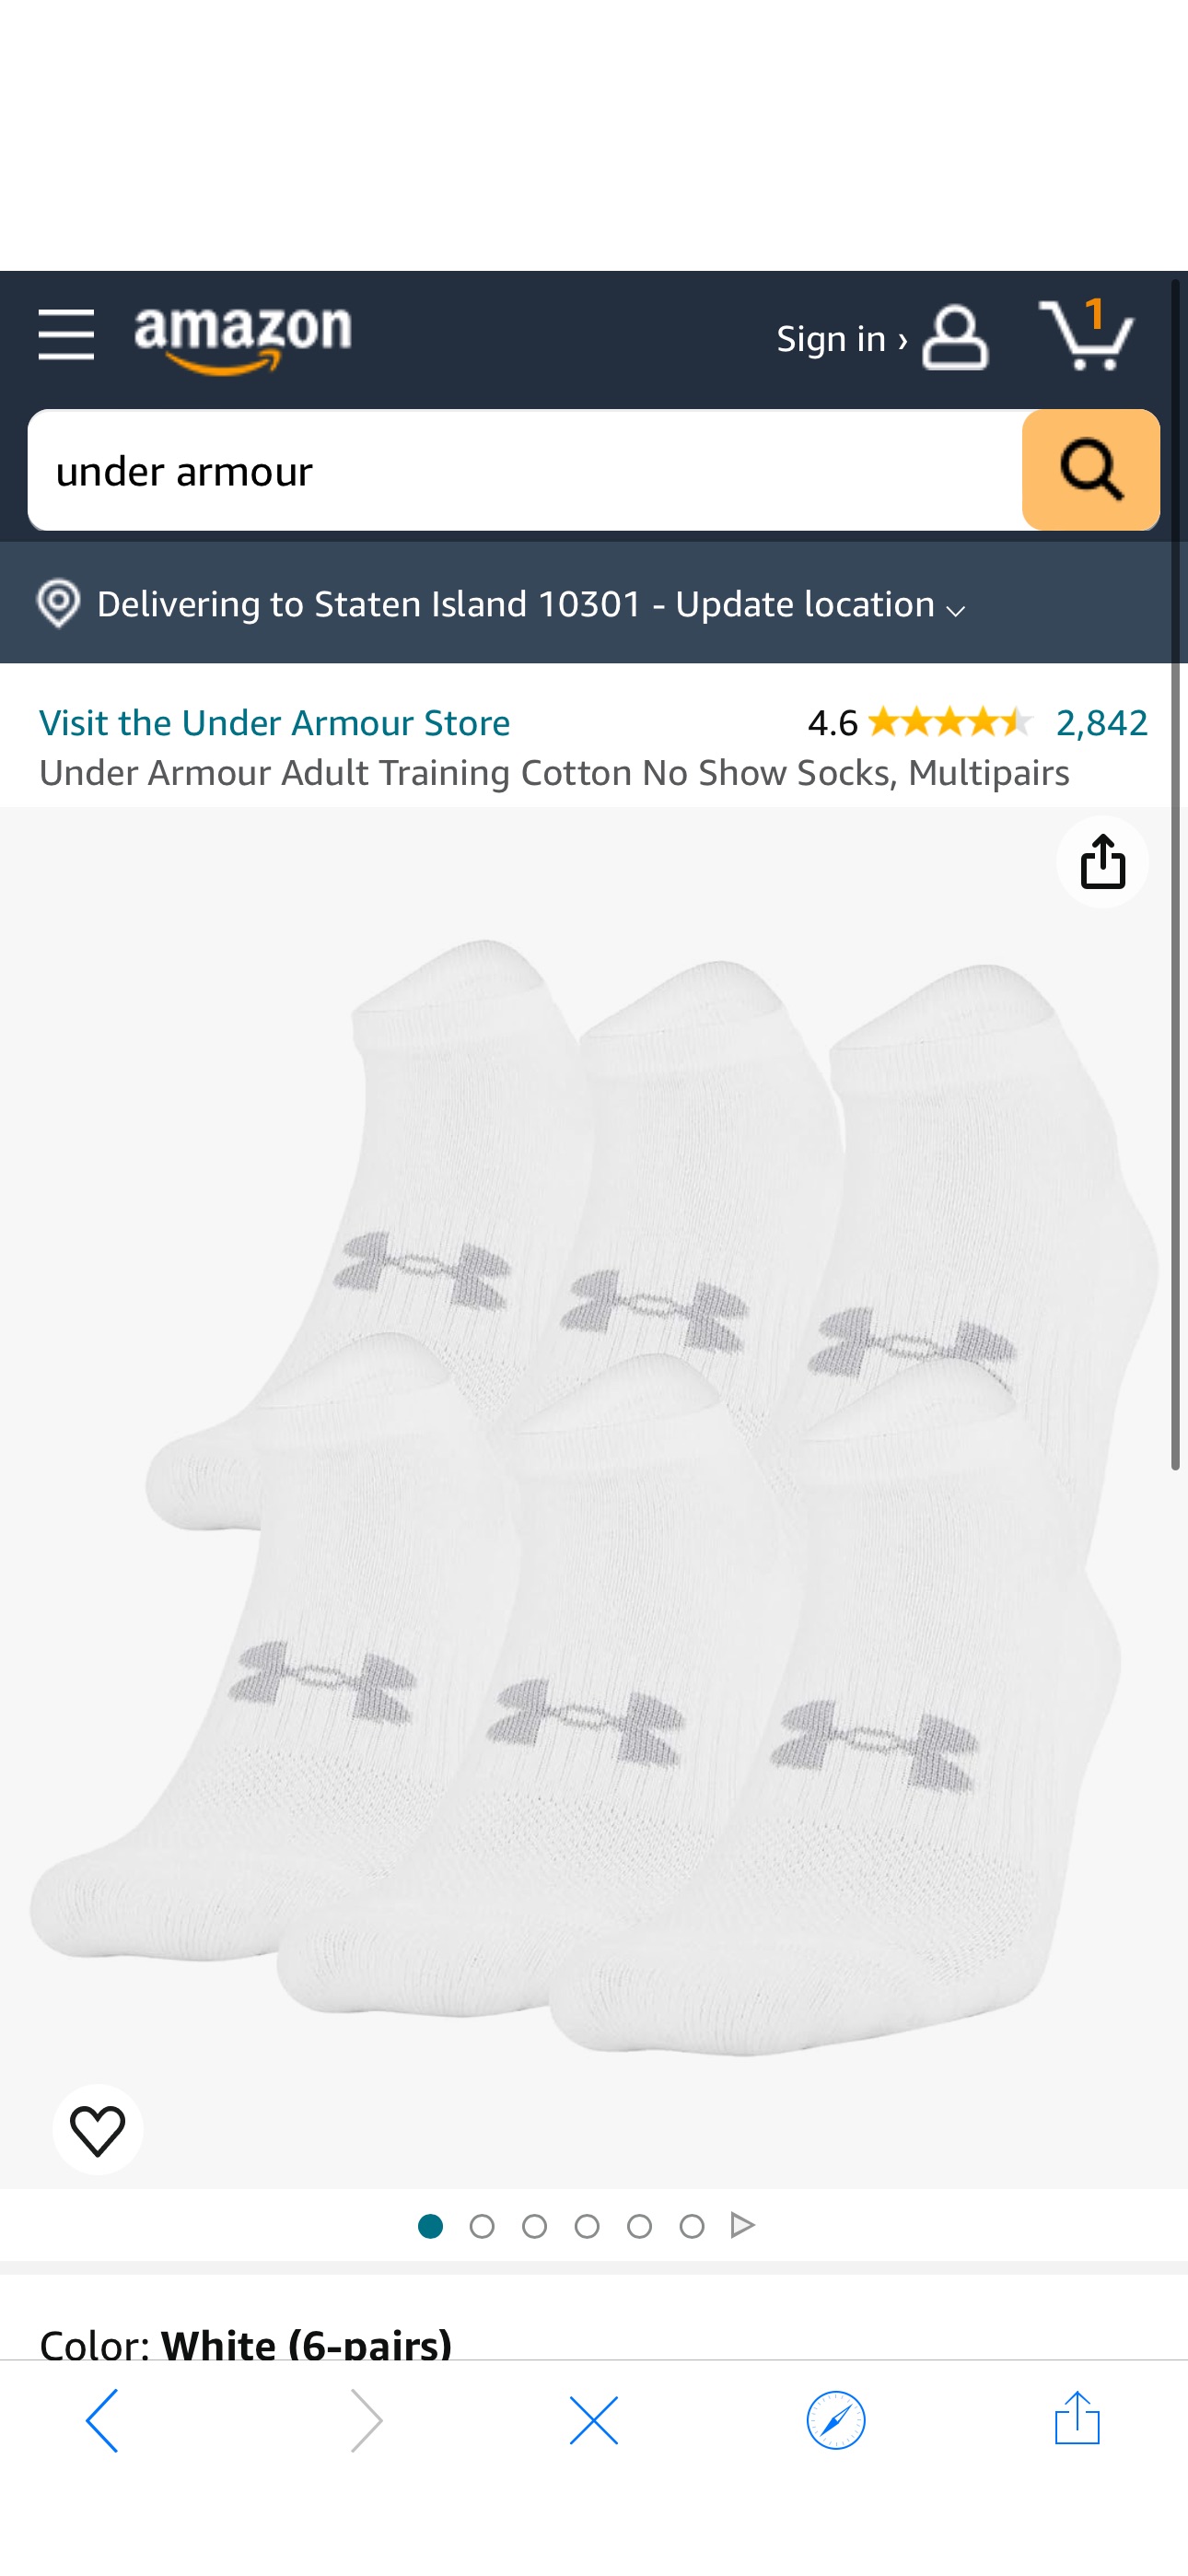 Amazon.com: Under Armour Adult Training Cotton No Show Socks, Multipairs , White (6-Pairs) , Large : Industrial & Scientific